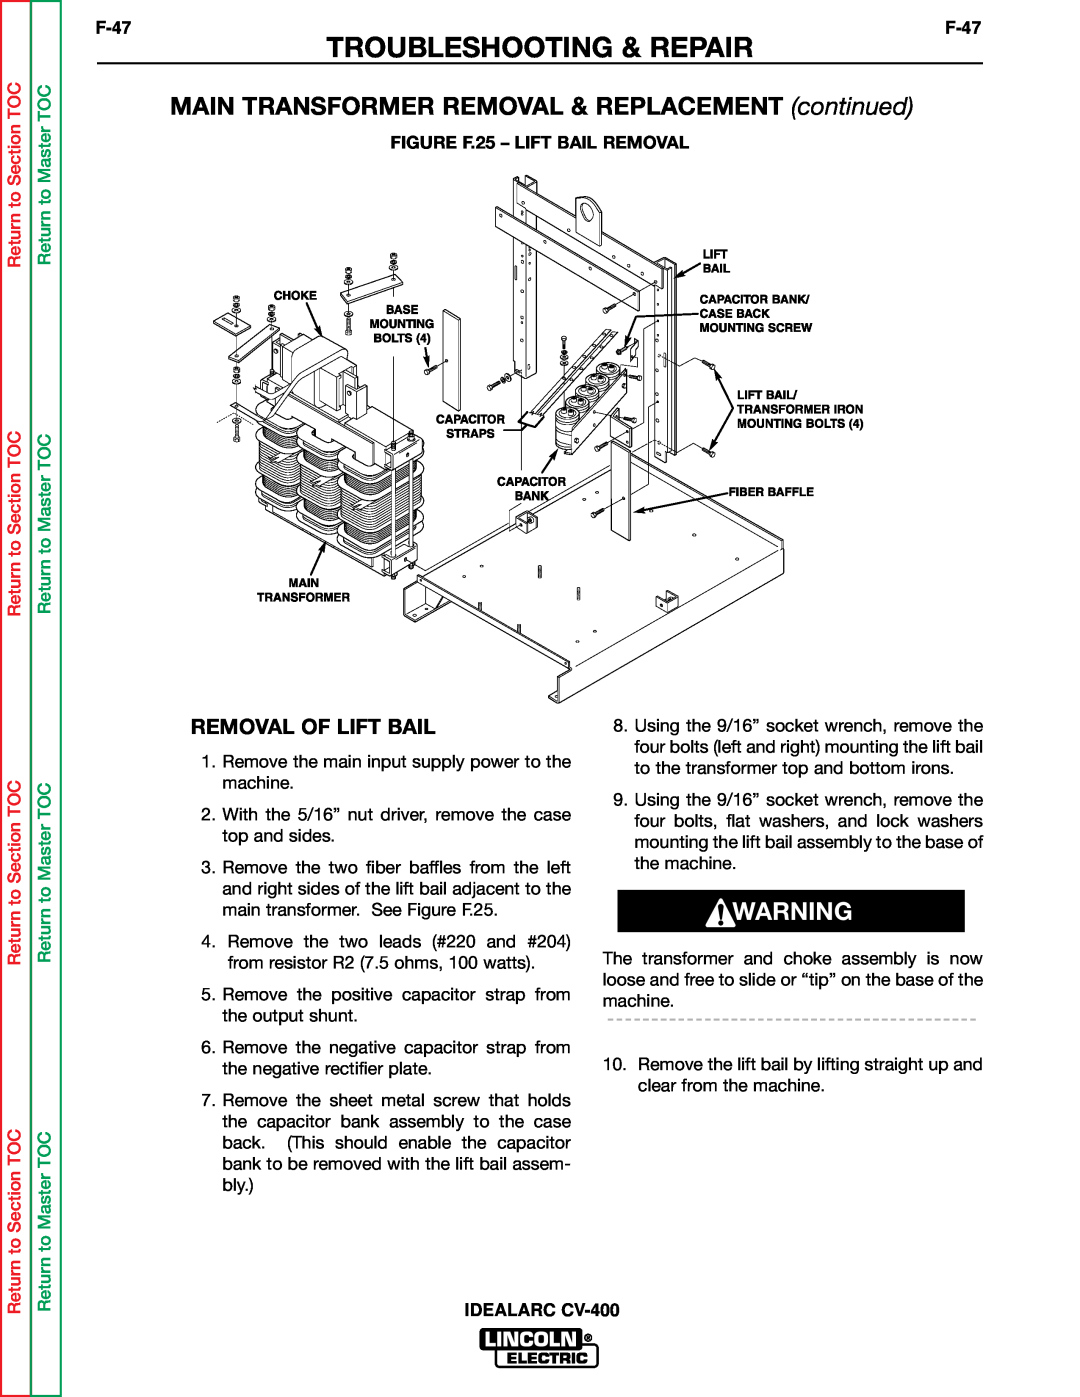 Lincoln Electric SVM136-A service manual MAIN TRANSFORMER REMOVAL & REPLACEMENT continued, Troubleshooting & Repair 